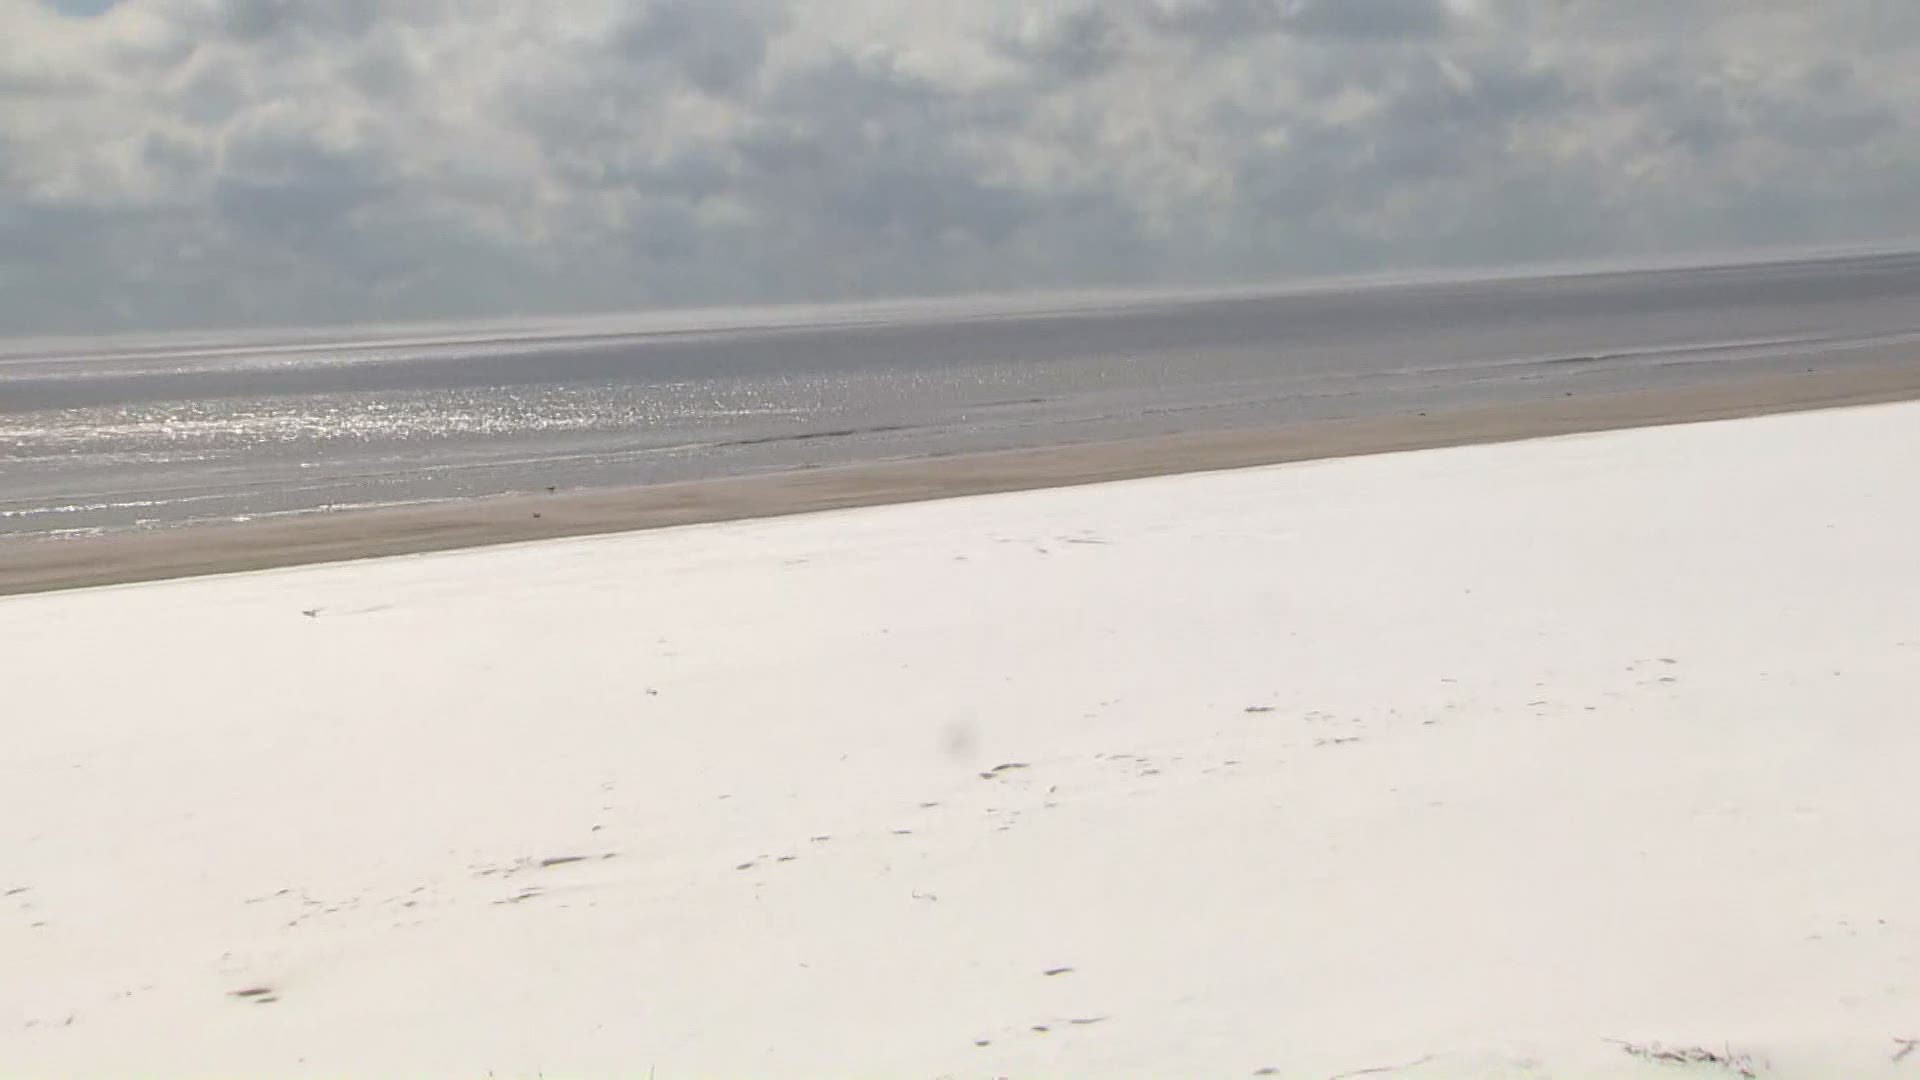 Galveston beach is covered in snow after an intense winter storm passed through the area. Many residents out enjoying the winter wonderland.